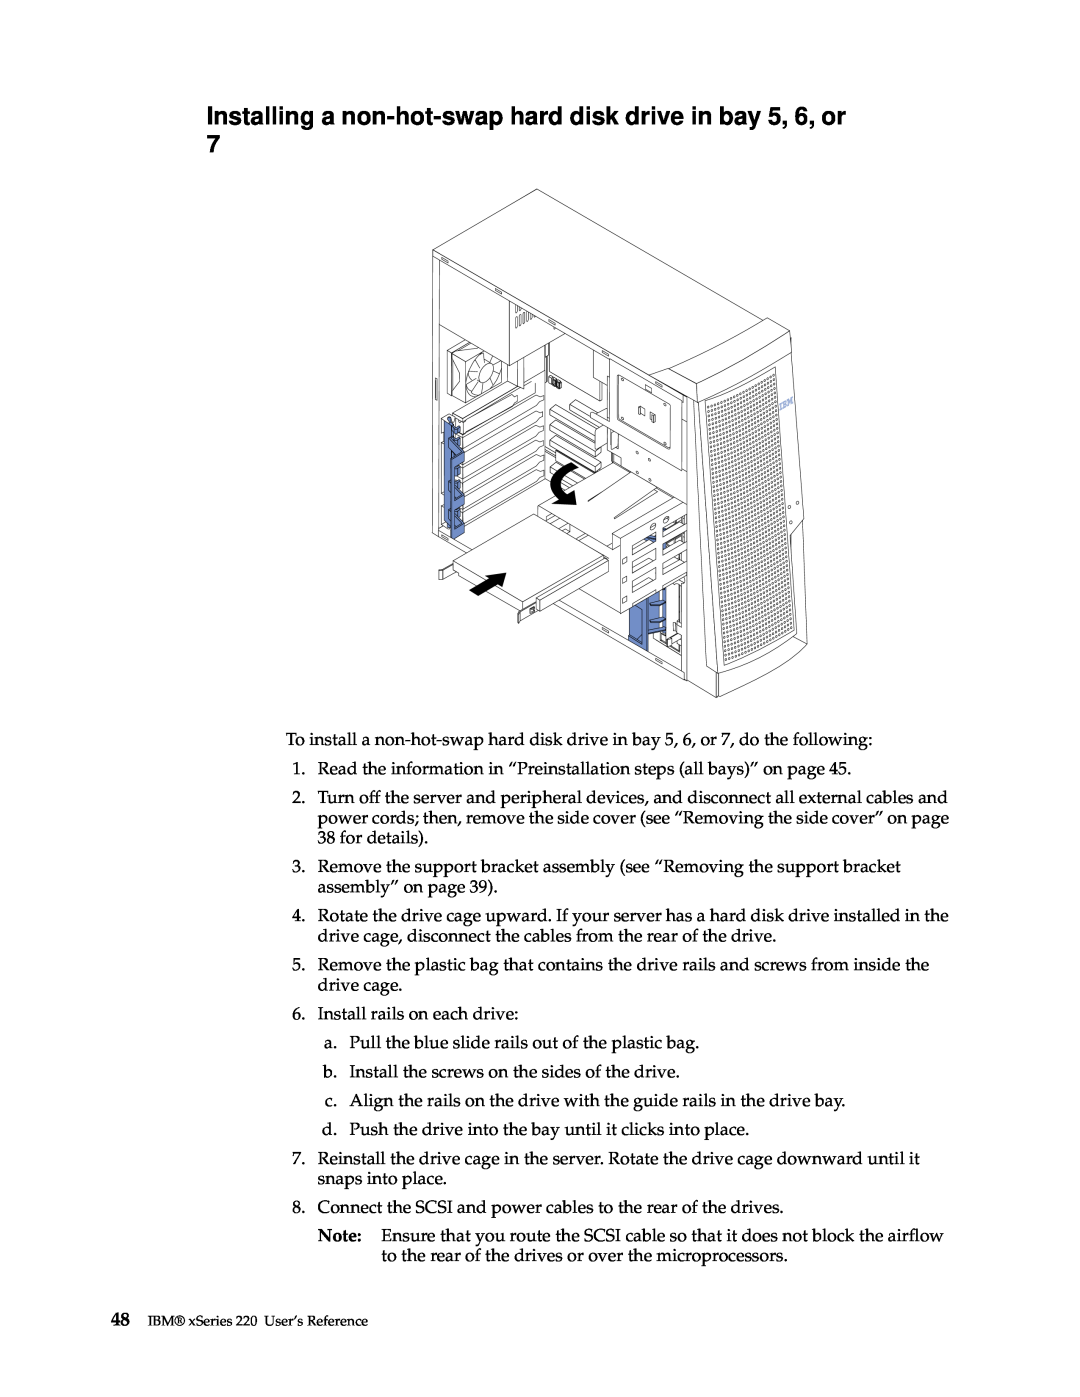 IBM manual Installing a non-hot-swap hard disk drive in bay 5, 6, or, IBM xSeries 220 User’s Reference 